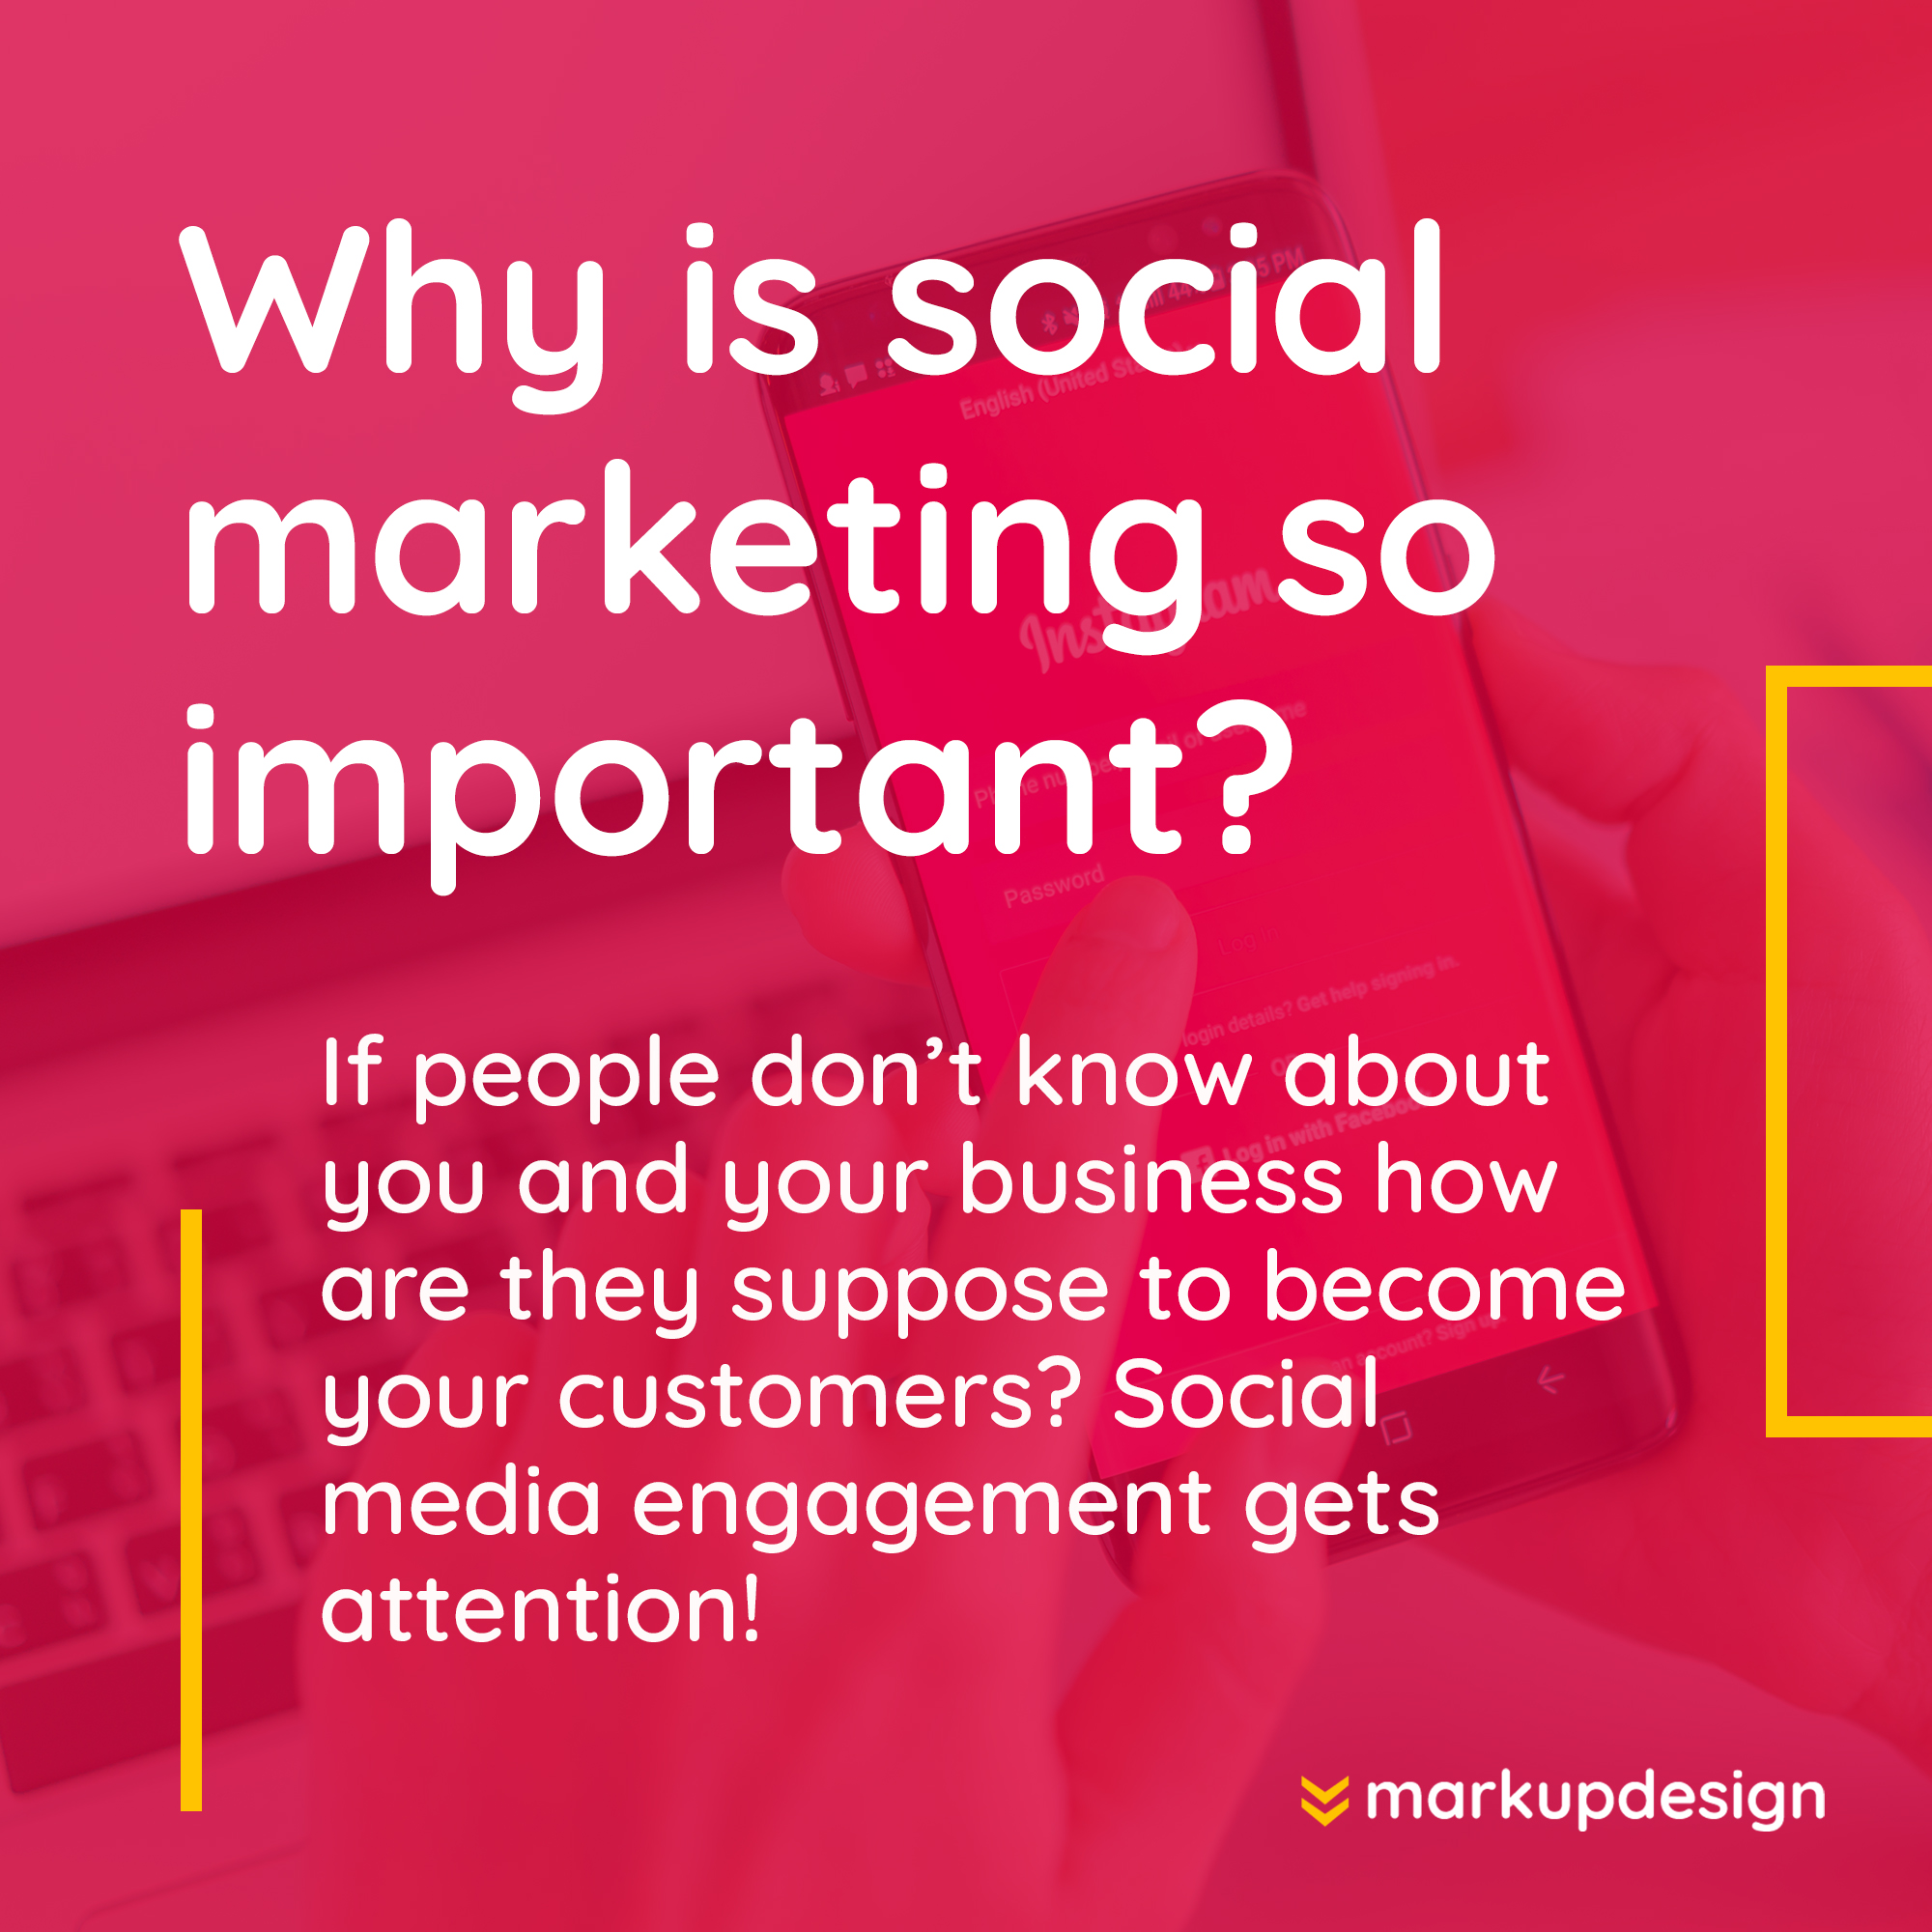 Why is social marketing so important? - Markup Design